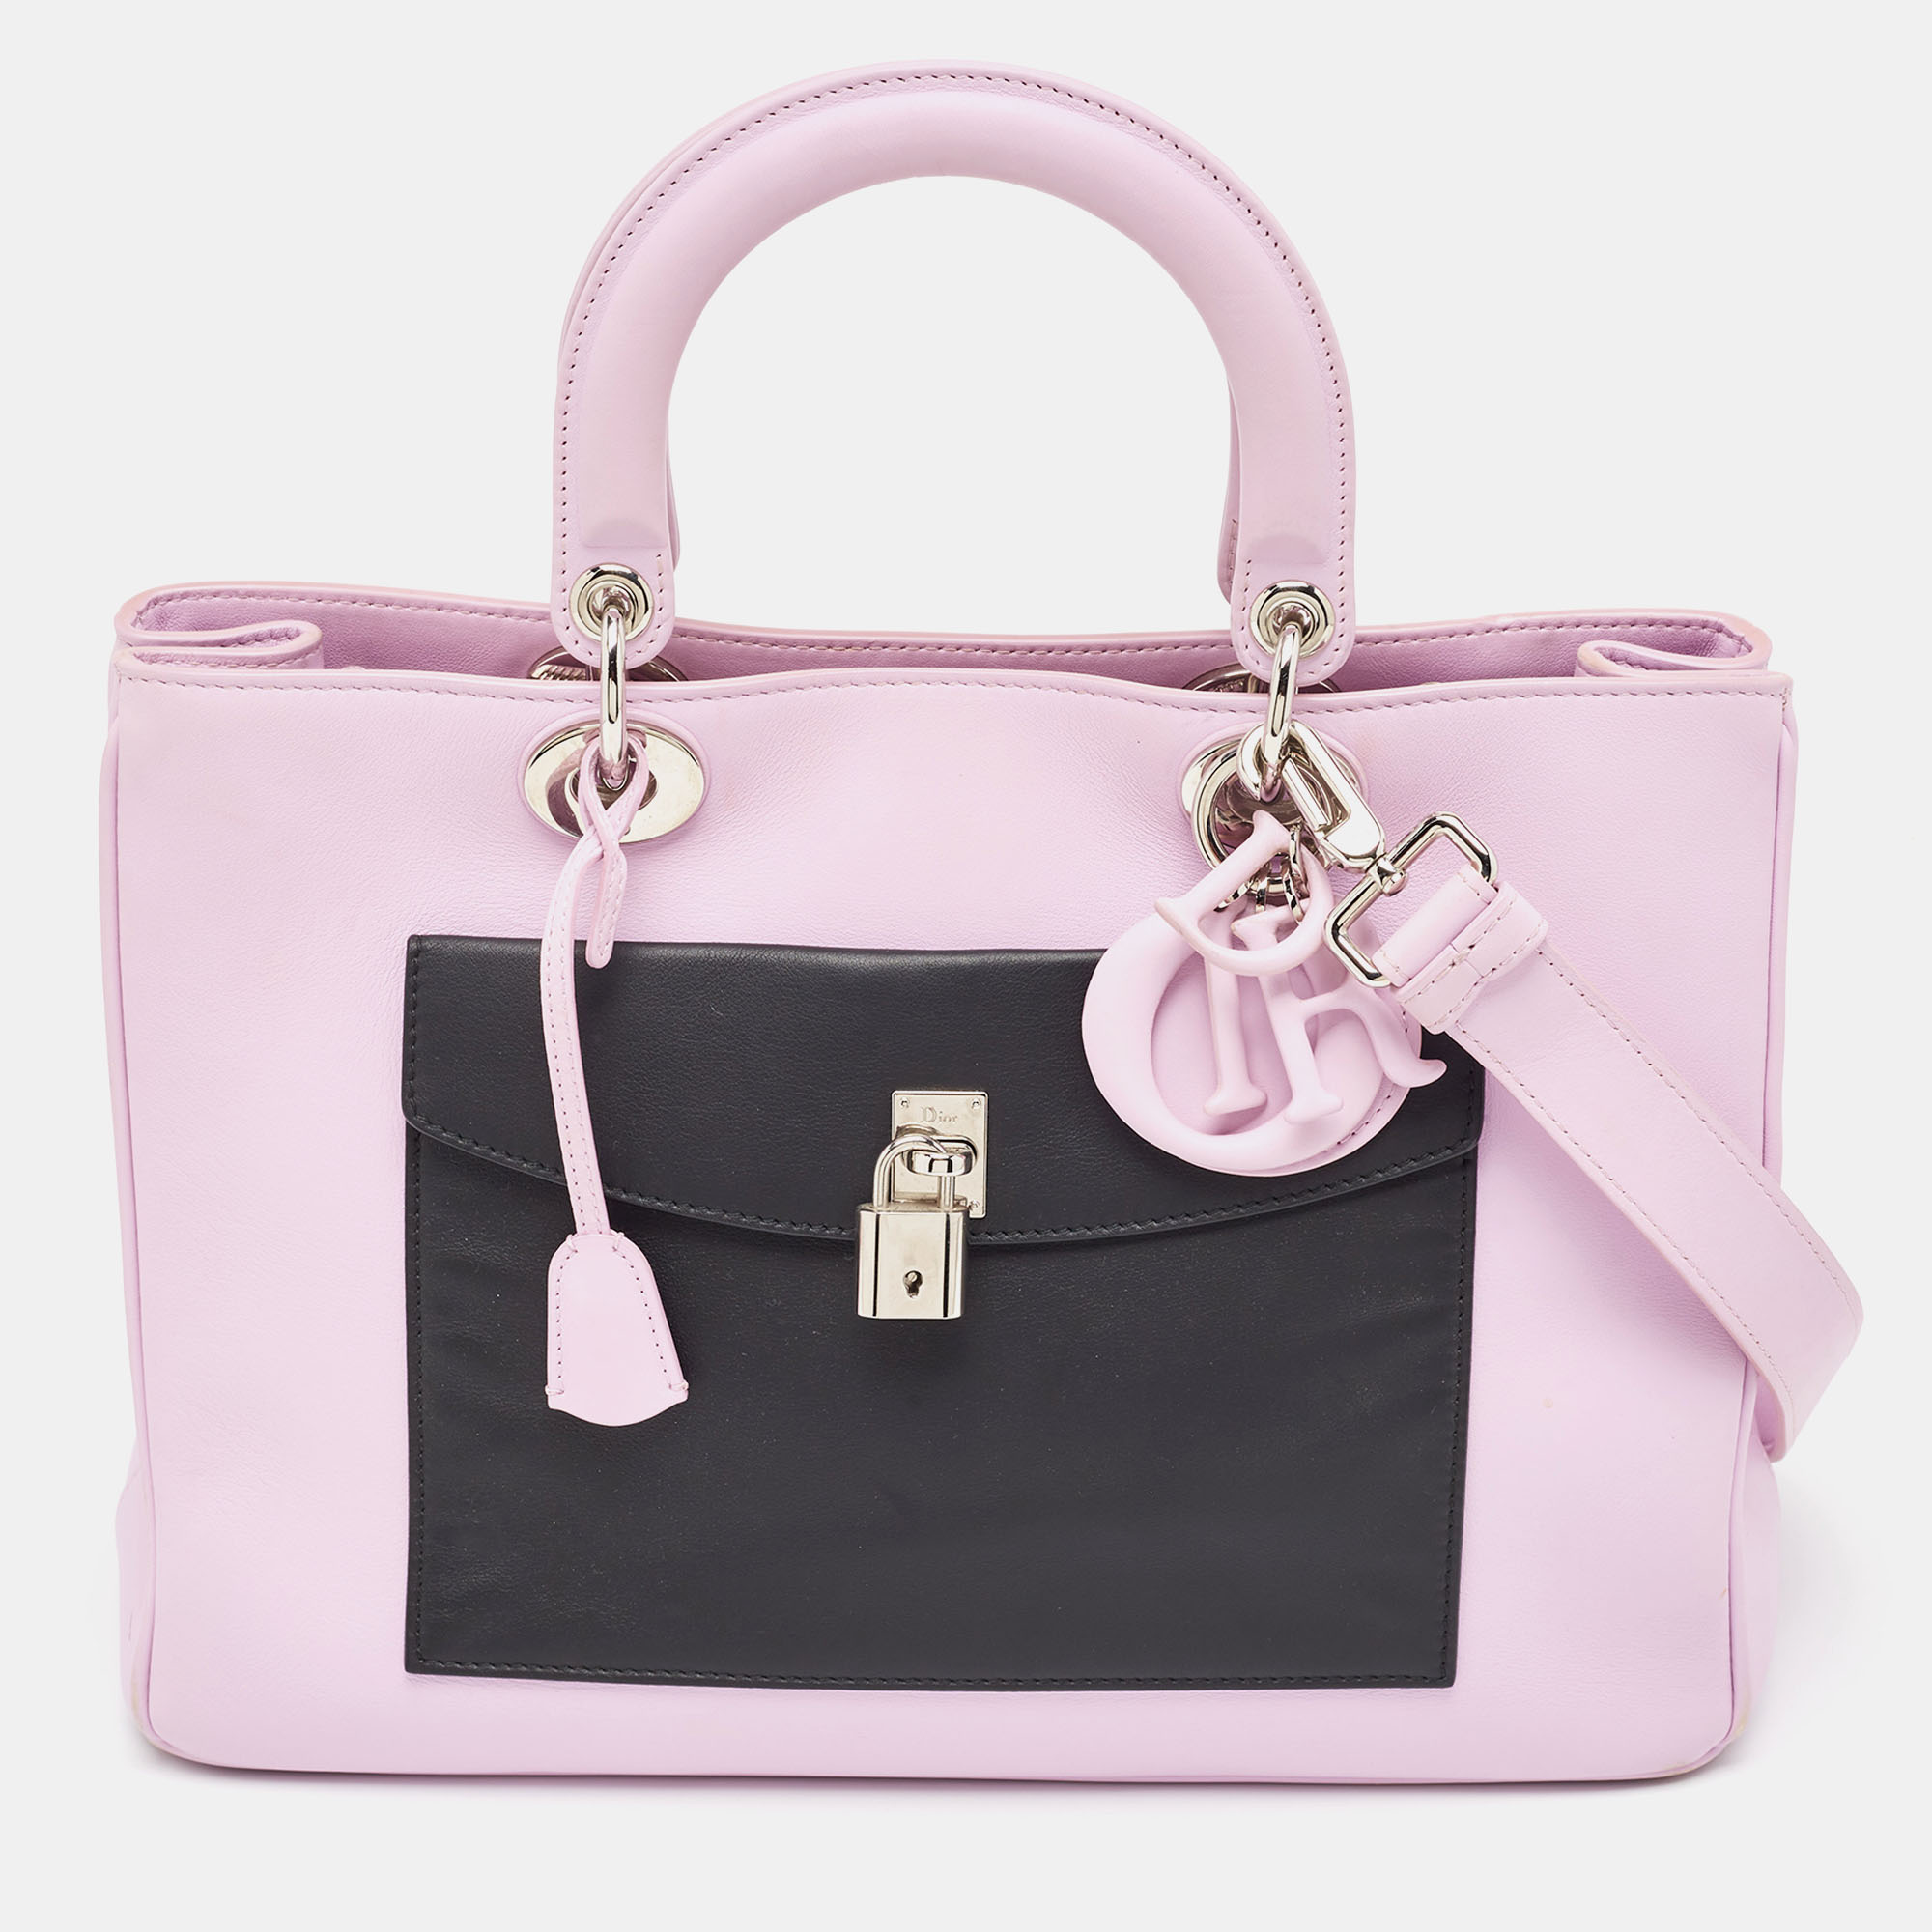 The Lady Dior tote is a Dior creation that has gained recognition worldwide and is today a coveted bag that every fashionista craves to possess. This lilac and black tote has been crafted from leather and it carries flap pockets both on the front and back. It is equipped with a leather interior and two top handles. The gorgeous piece is complete with the classic Dior letter charms.